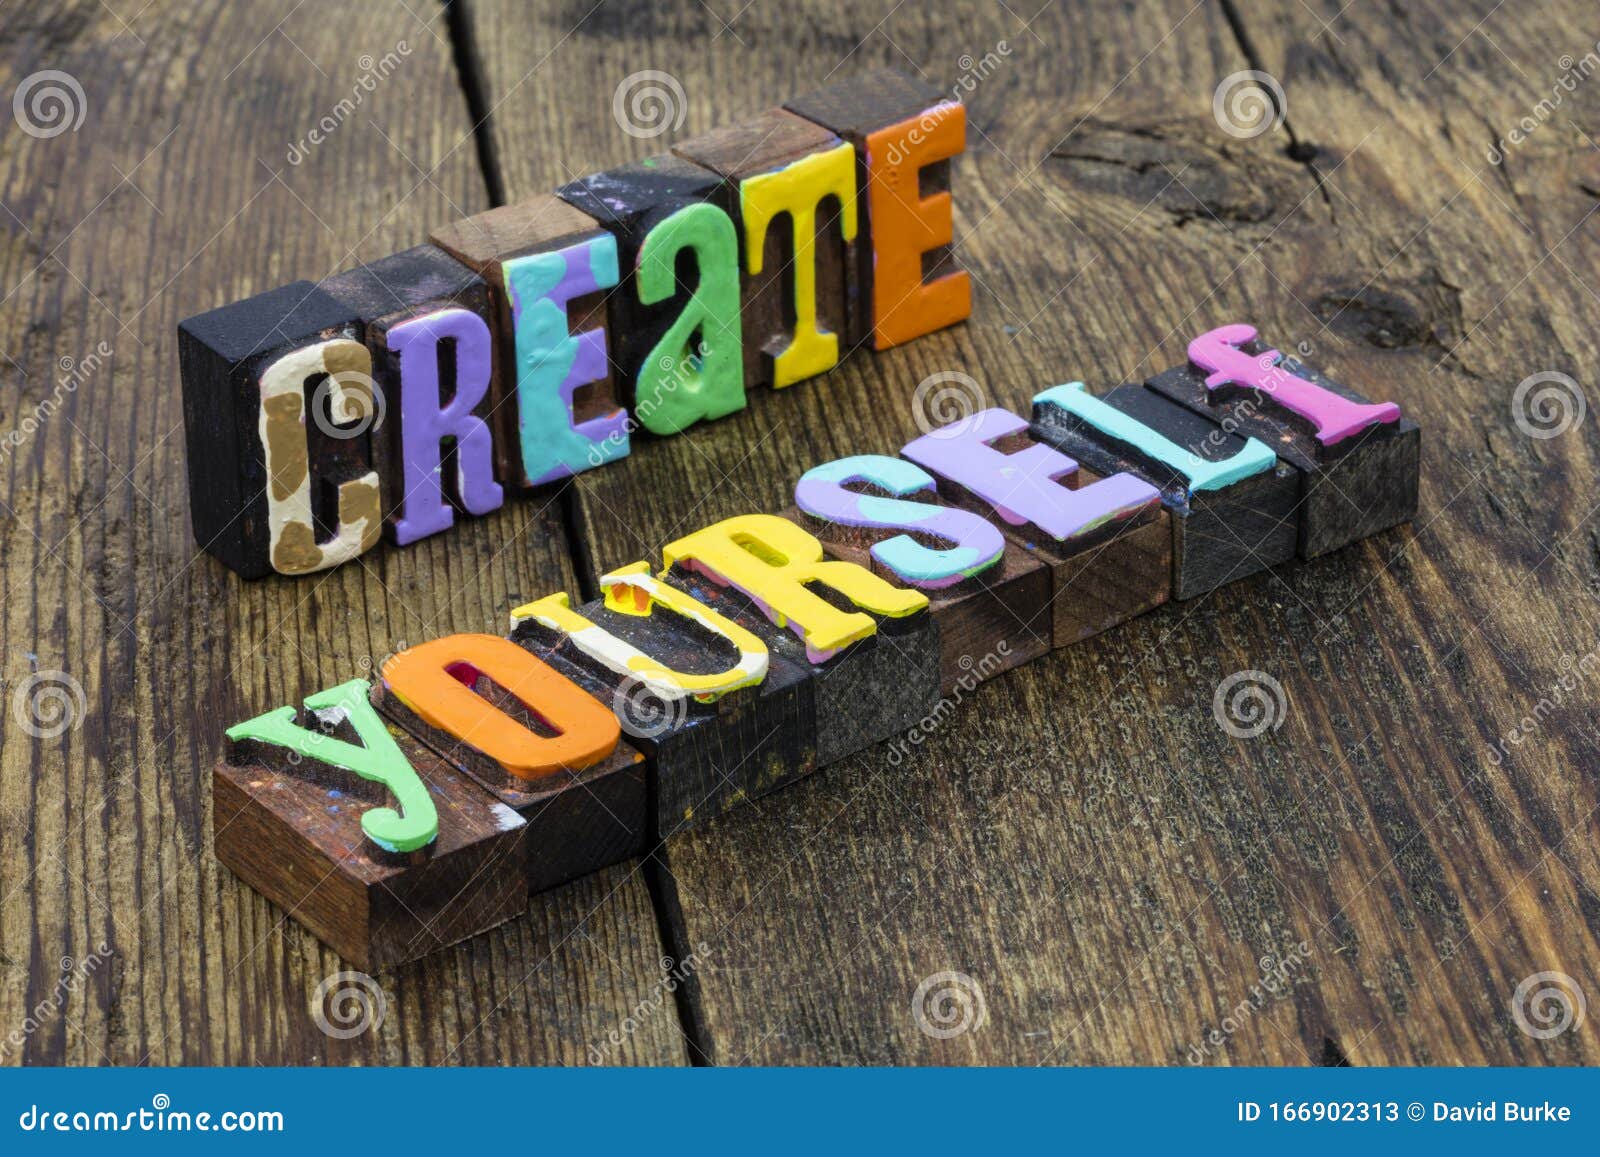 create yourself appearance imagination identify challenge personal strength